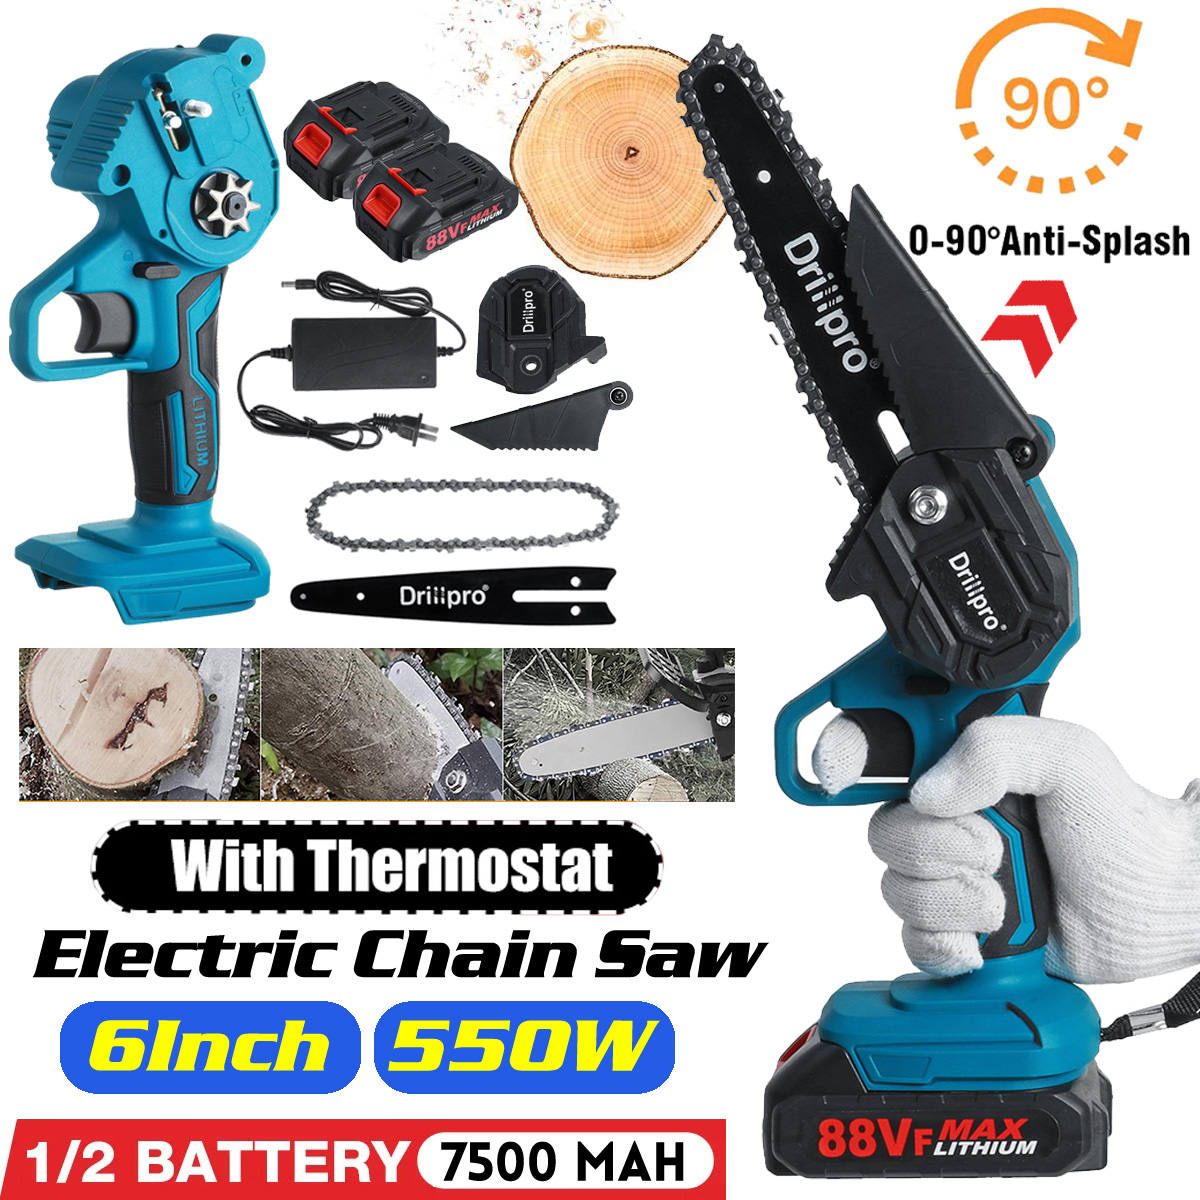 Drillpro-6-Inch-Electric-Chain-Saw-Portable-Woodworking-Tool-Wood-Cutter-W-1-or-2pcs-Battery-For-Mak-1830156-1